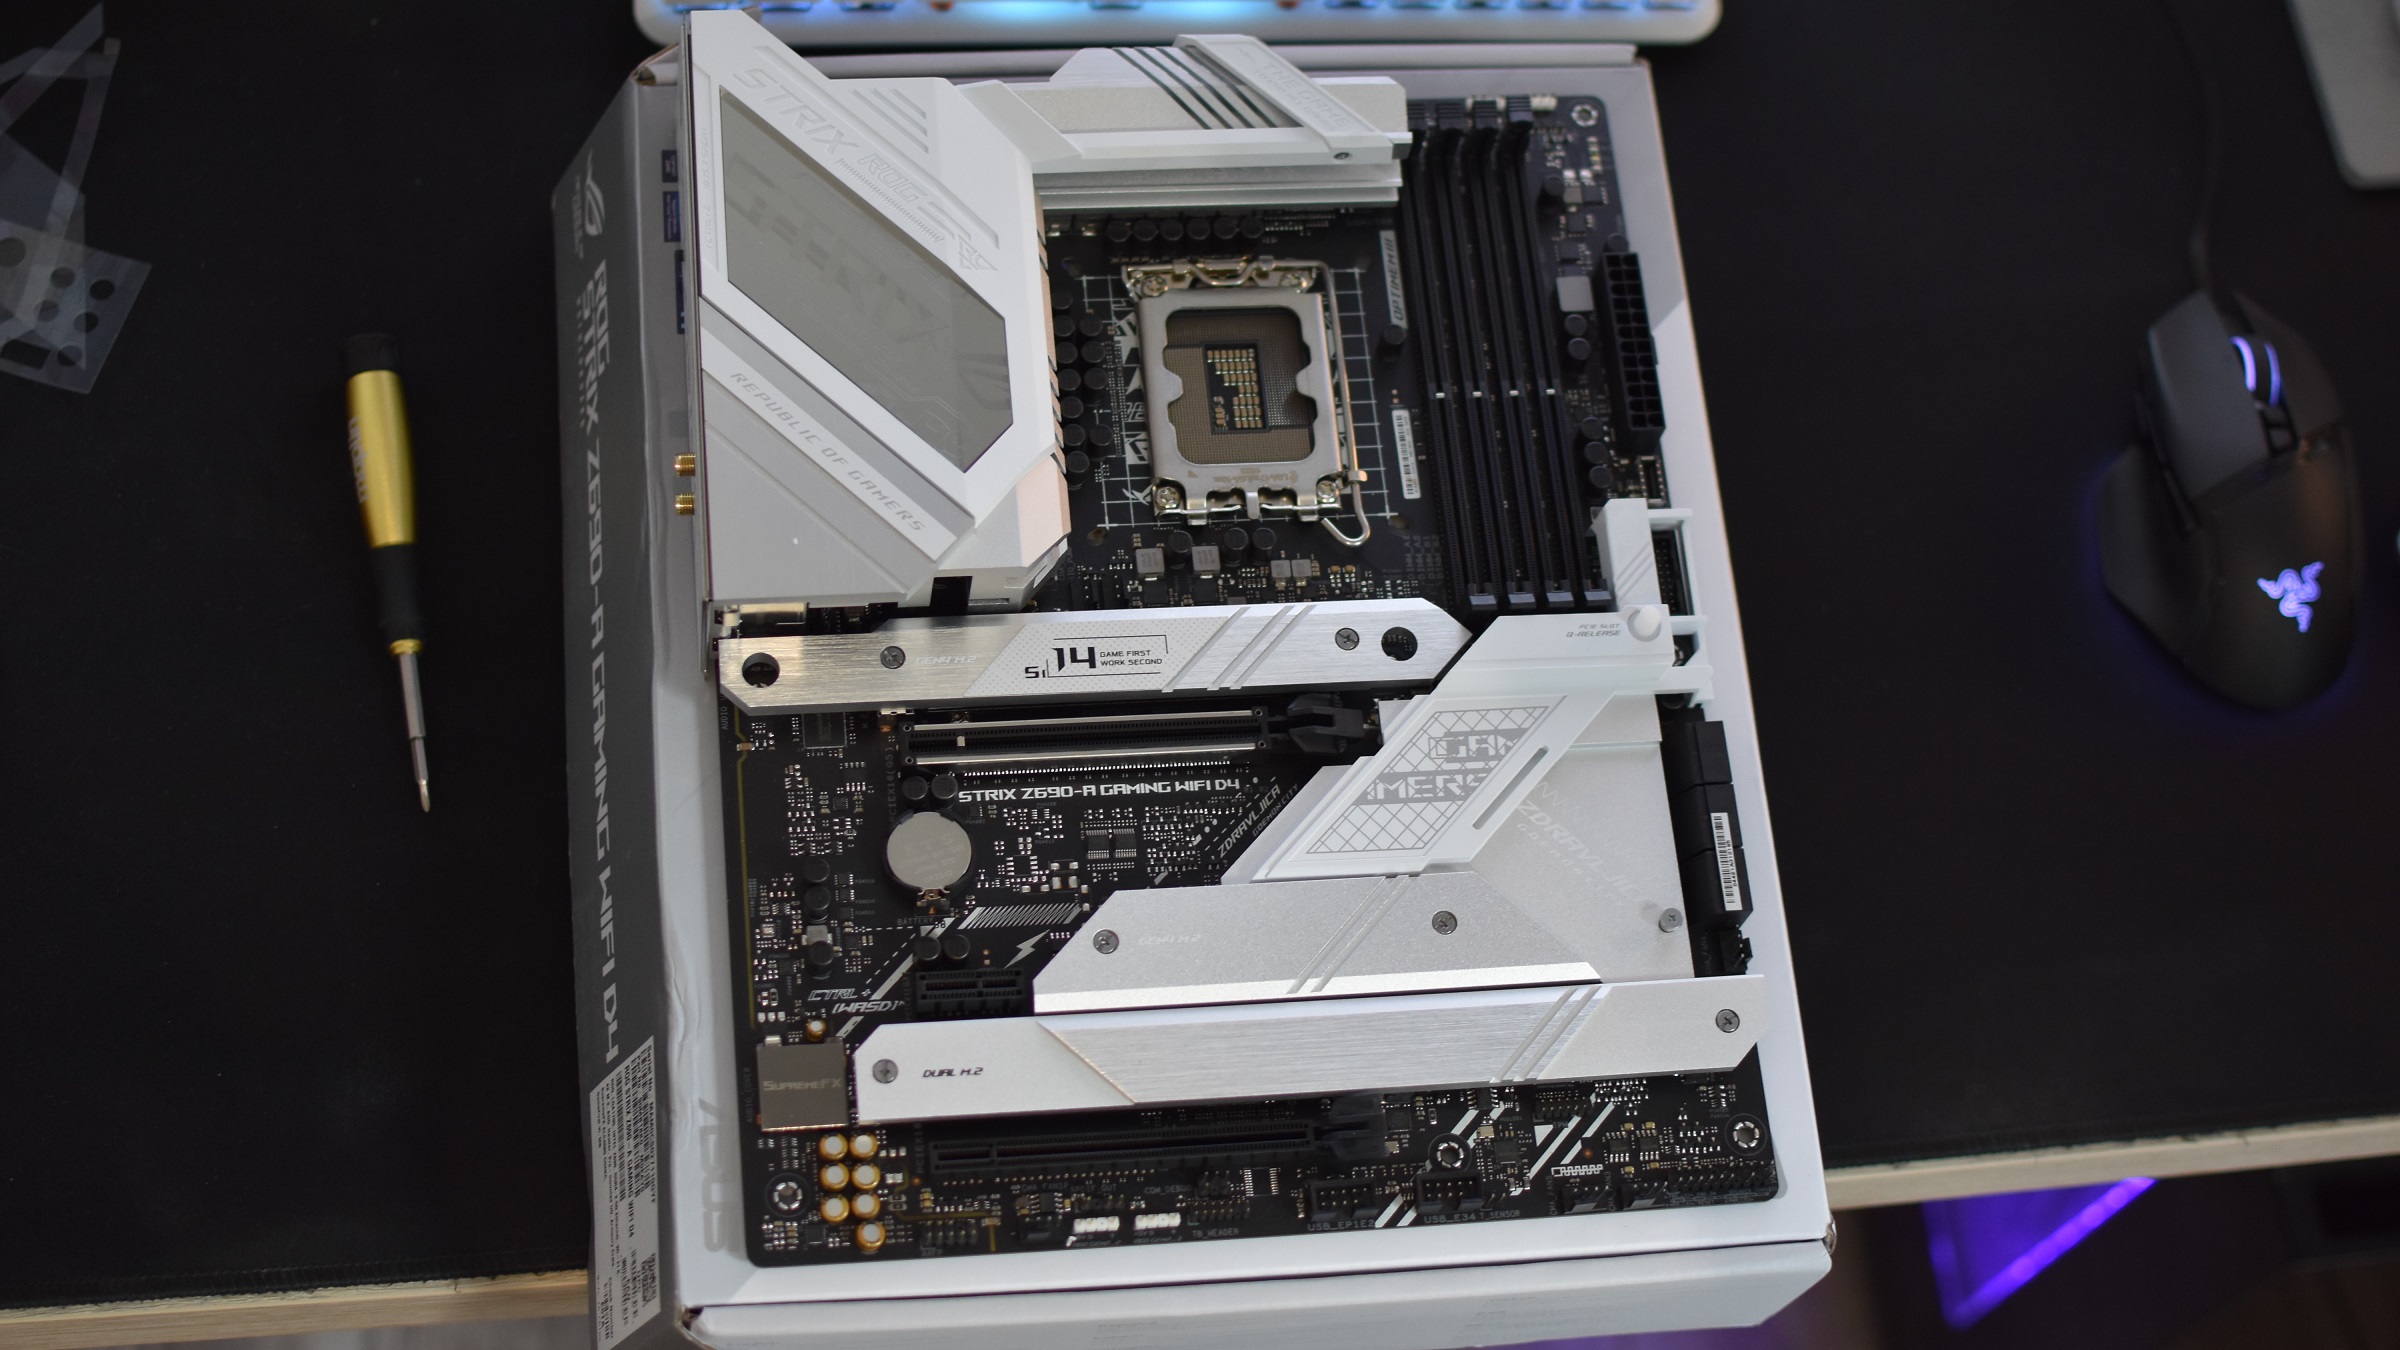 The Asus ROG Strix Z690-A Gaming WiFi D4 motherboard on a desk.